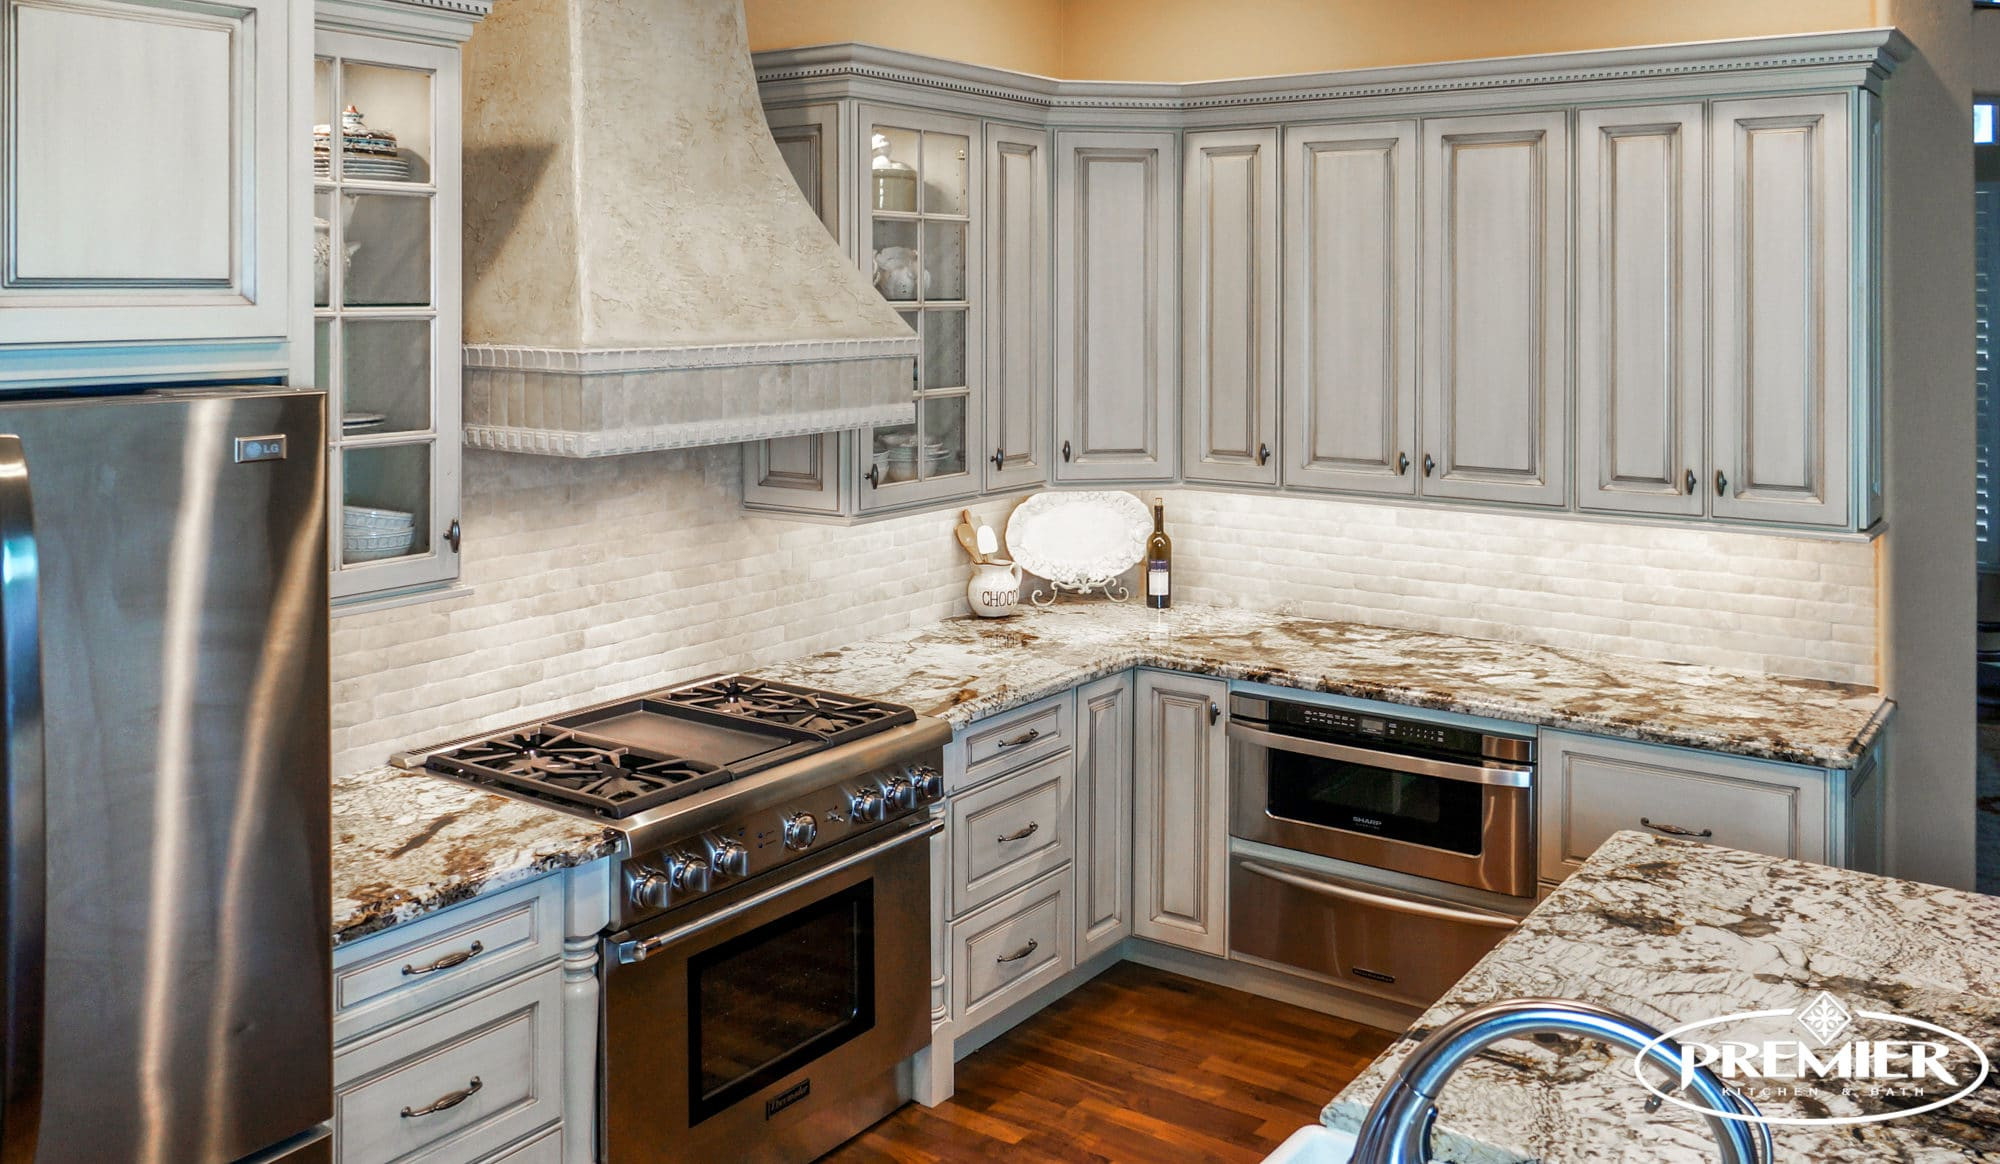 local kitchen and bath remodelers